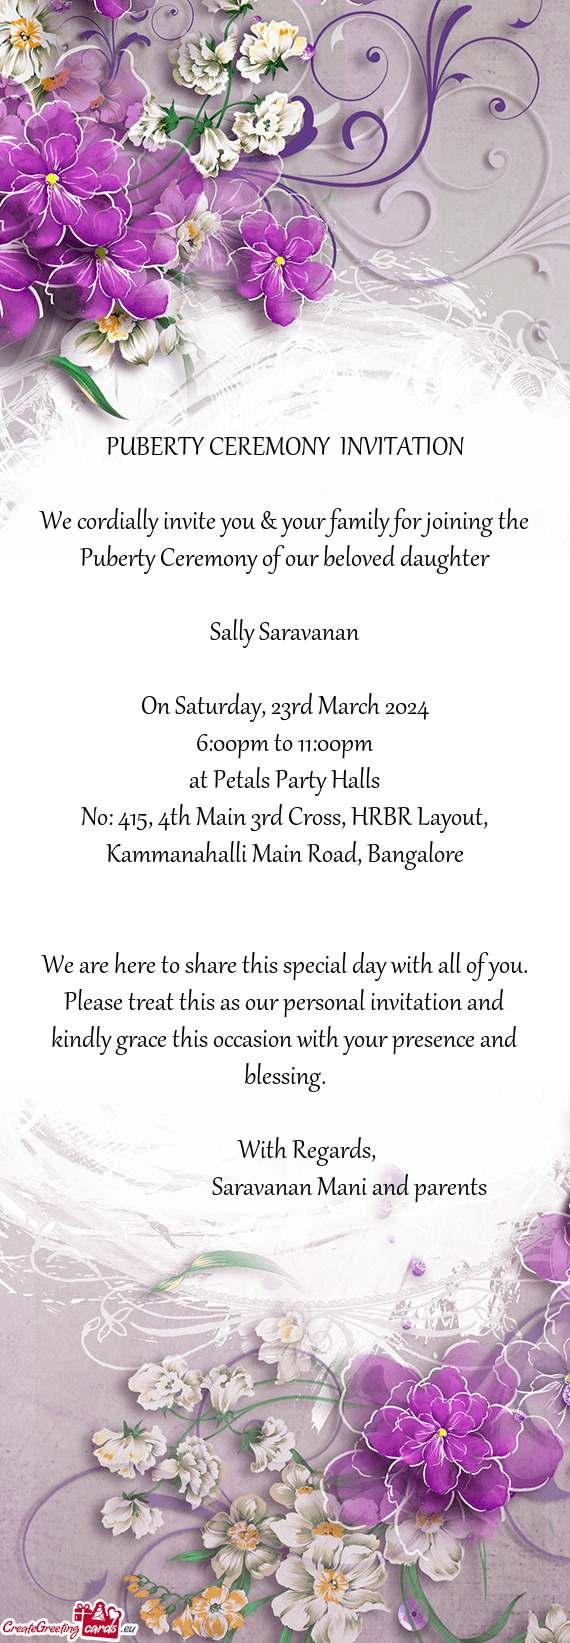 We cordially invite you & your family for joining the Puberty Ceremony of our beloved daughter